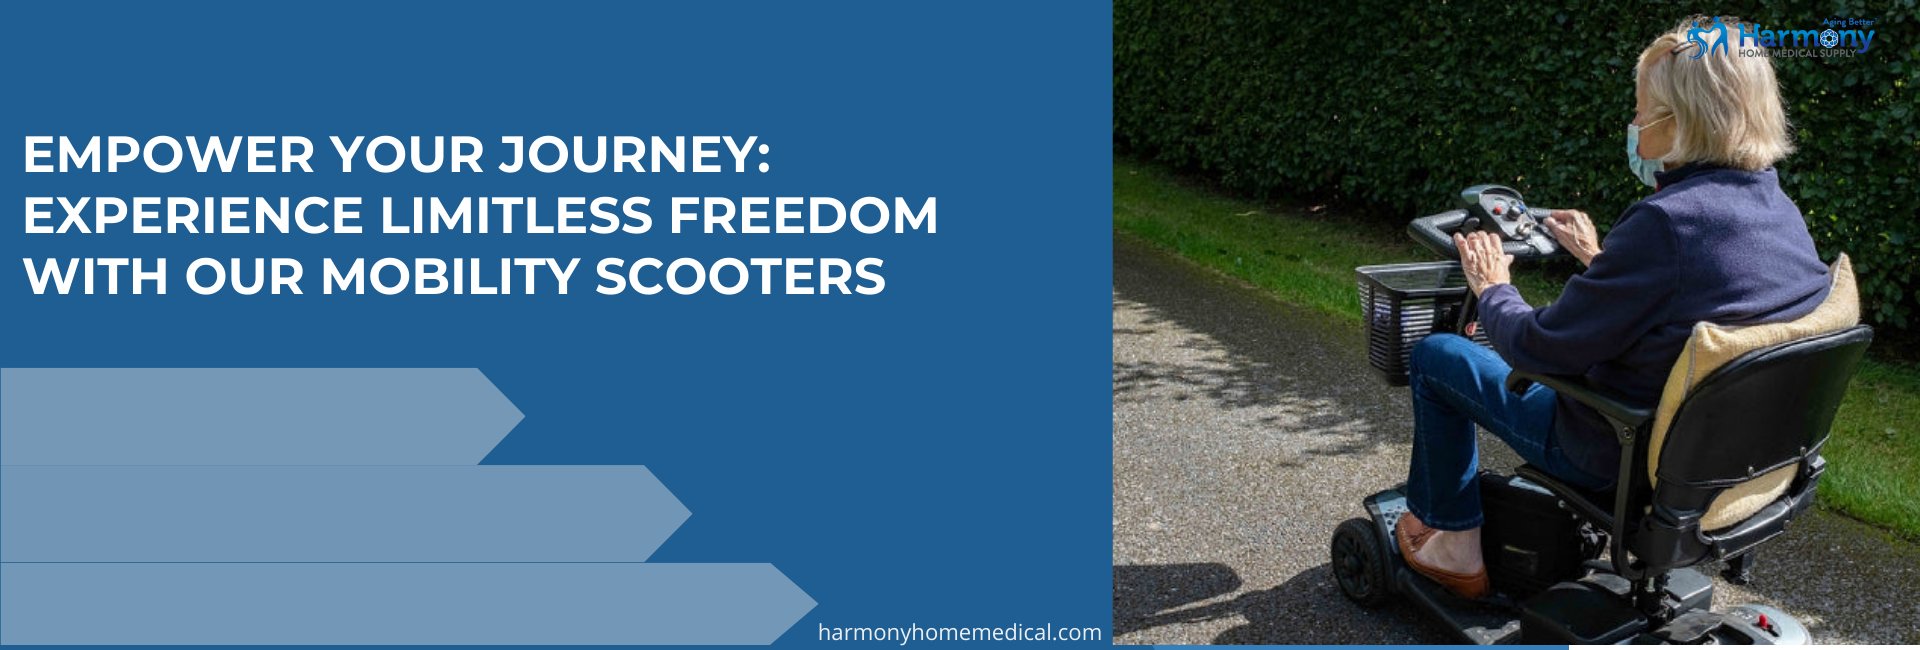 Unlock Freedom: Empower Your Journey with Our Mobility Scooters